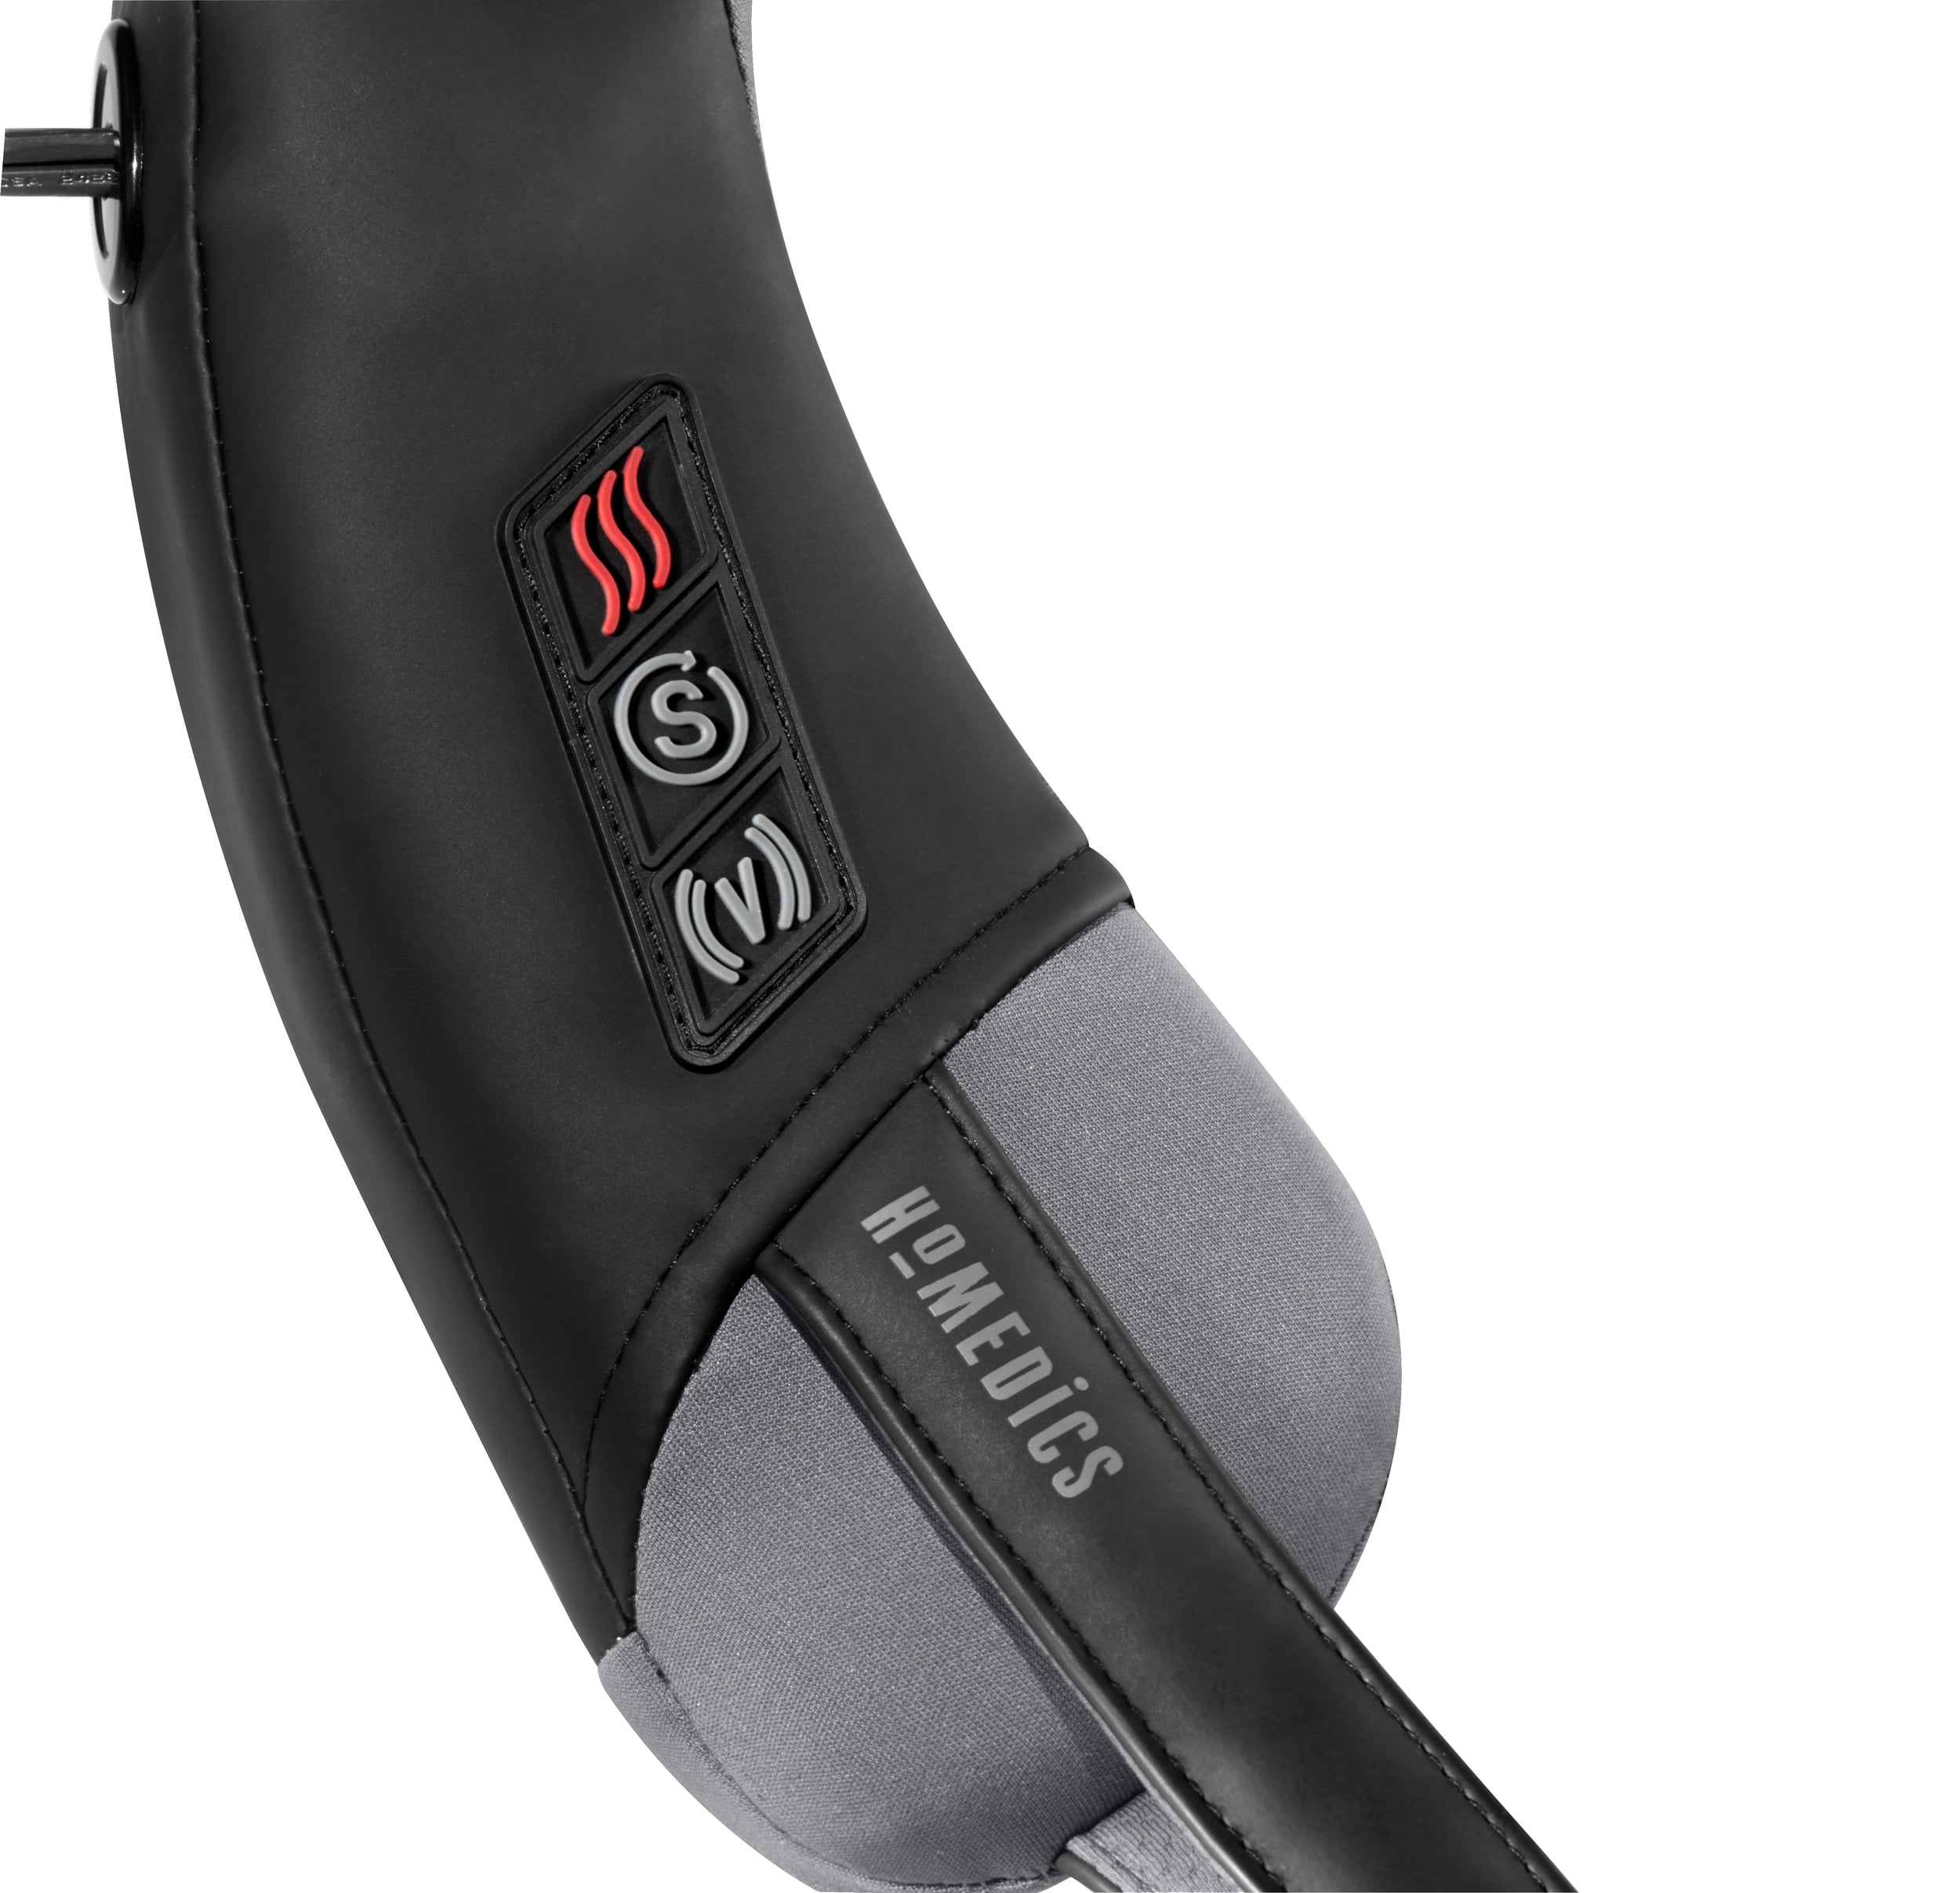 HoMedics Pro Therapy Vibration Neck Massager with Heat Black/Gray  NMSQ-217HJ - Best Buy